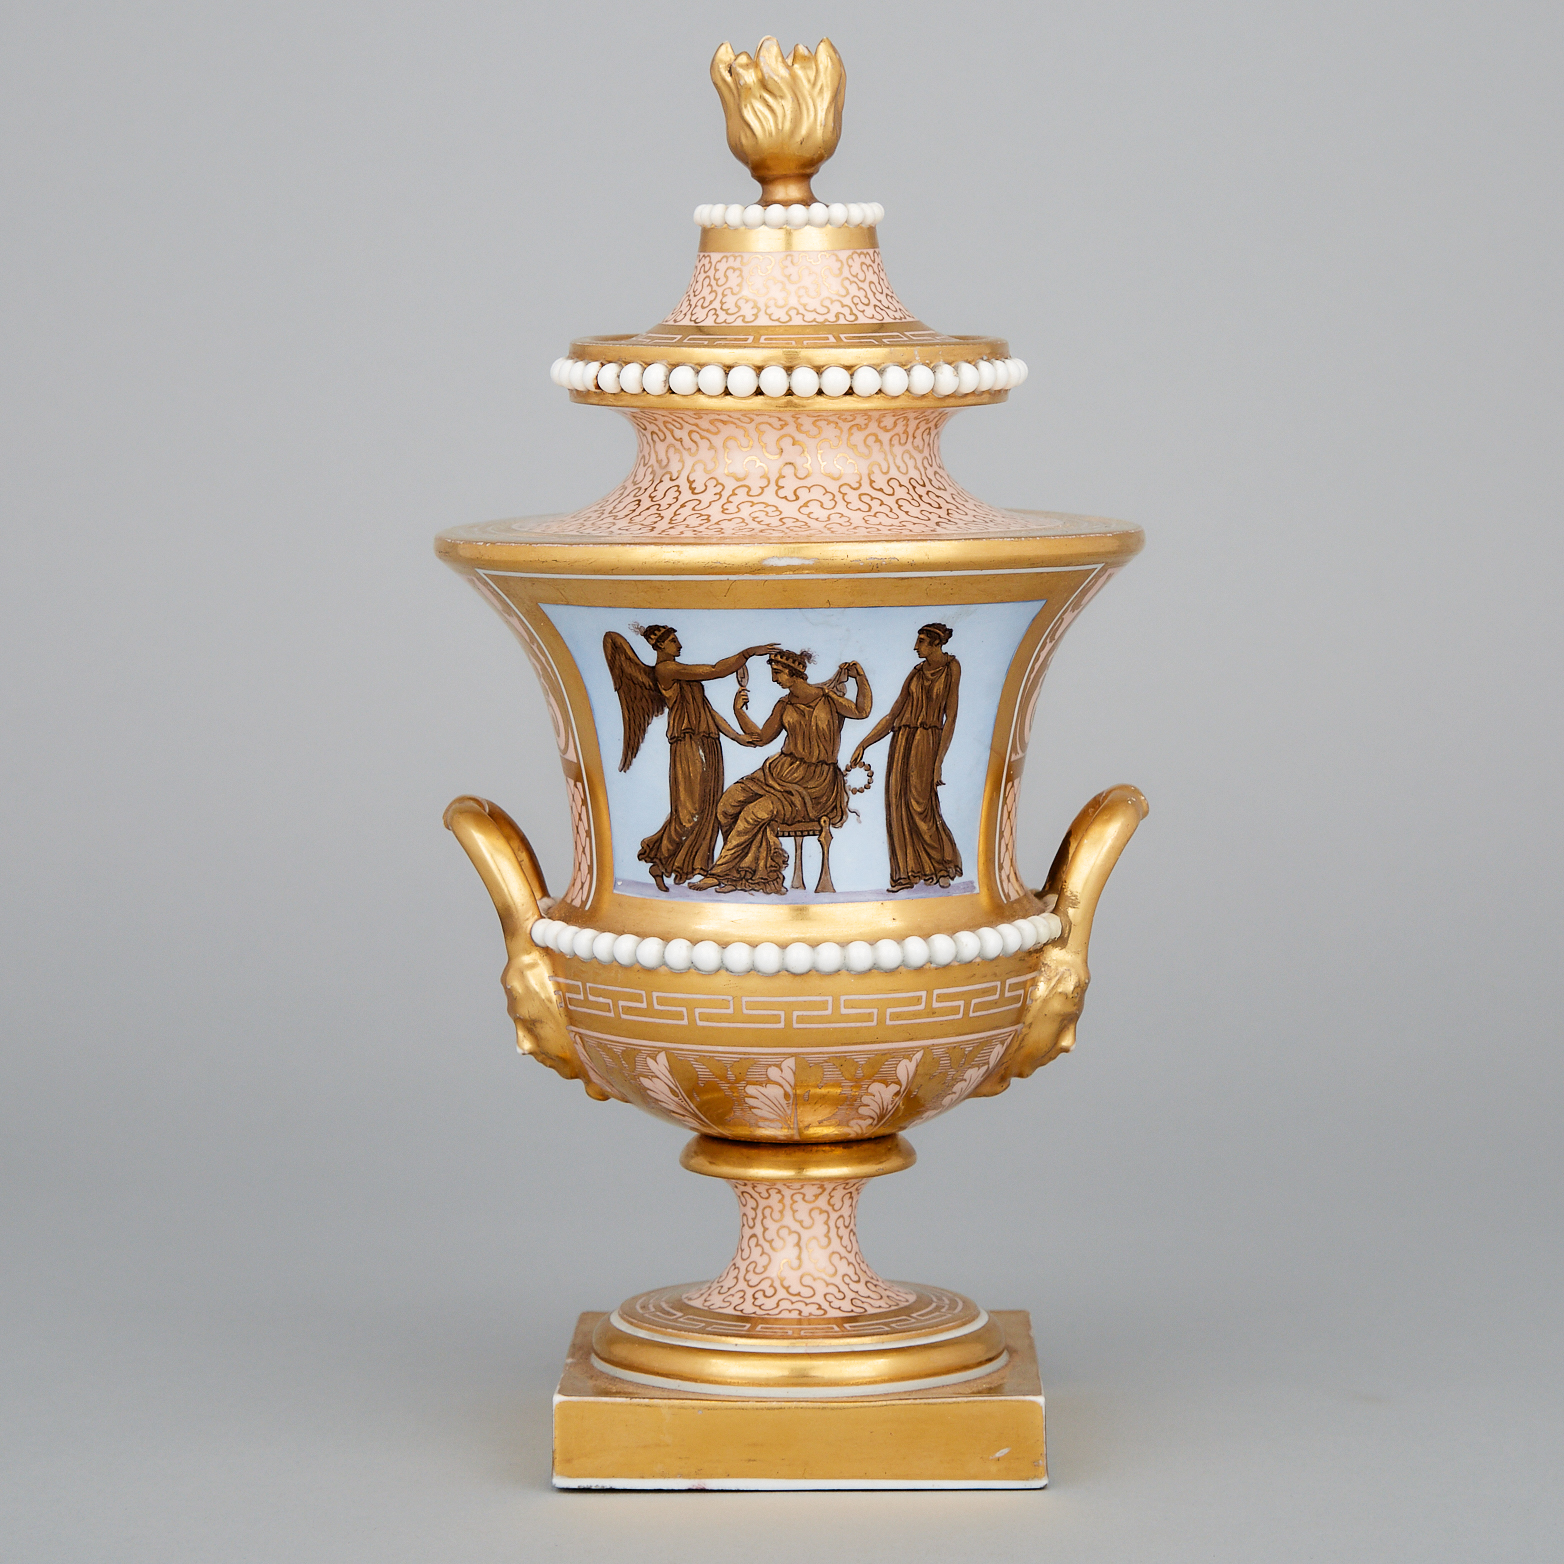 Barr, Flight & Barr Worcester Apricot and Gilt Ground Two-Handled Vase and Cover, c.1810